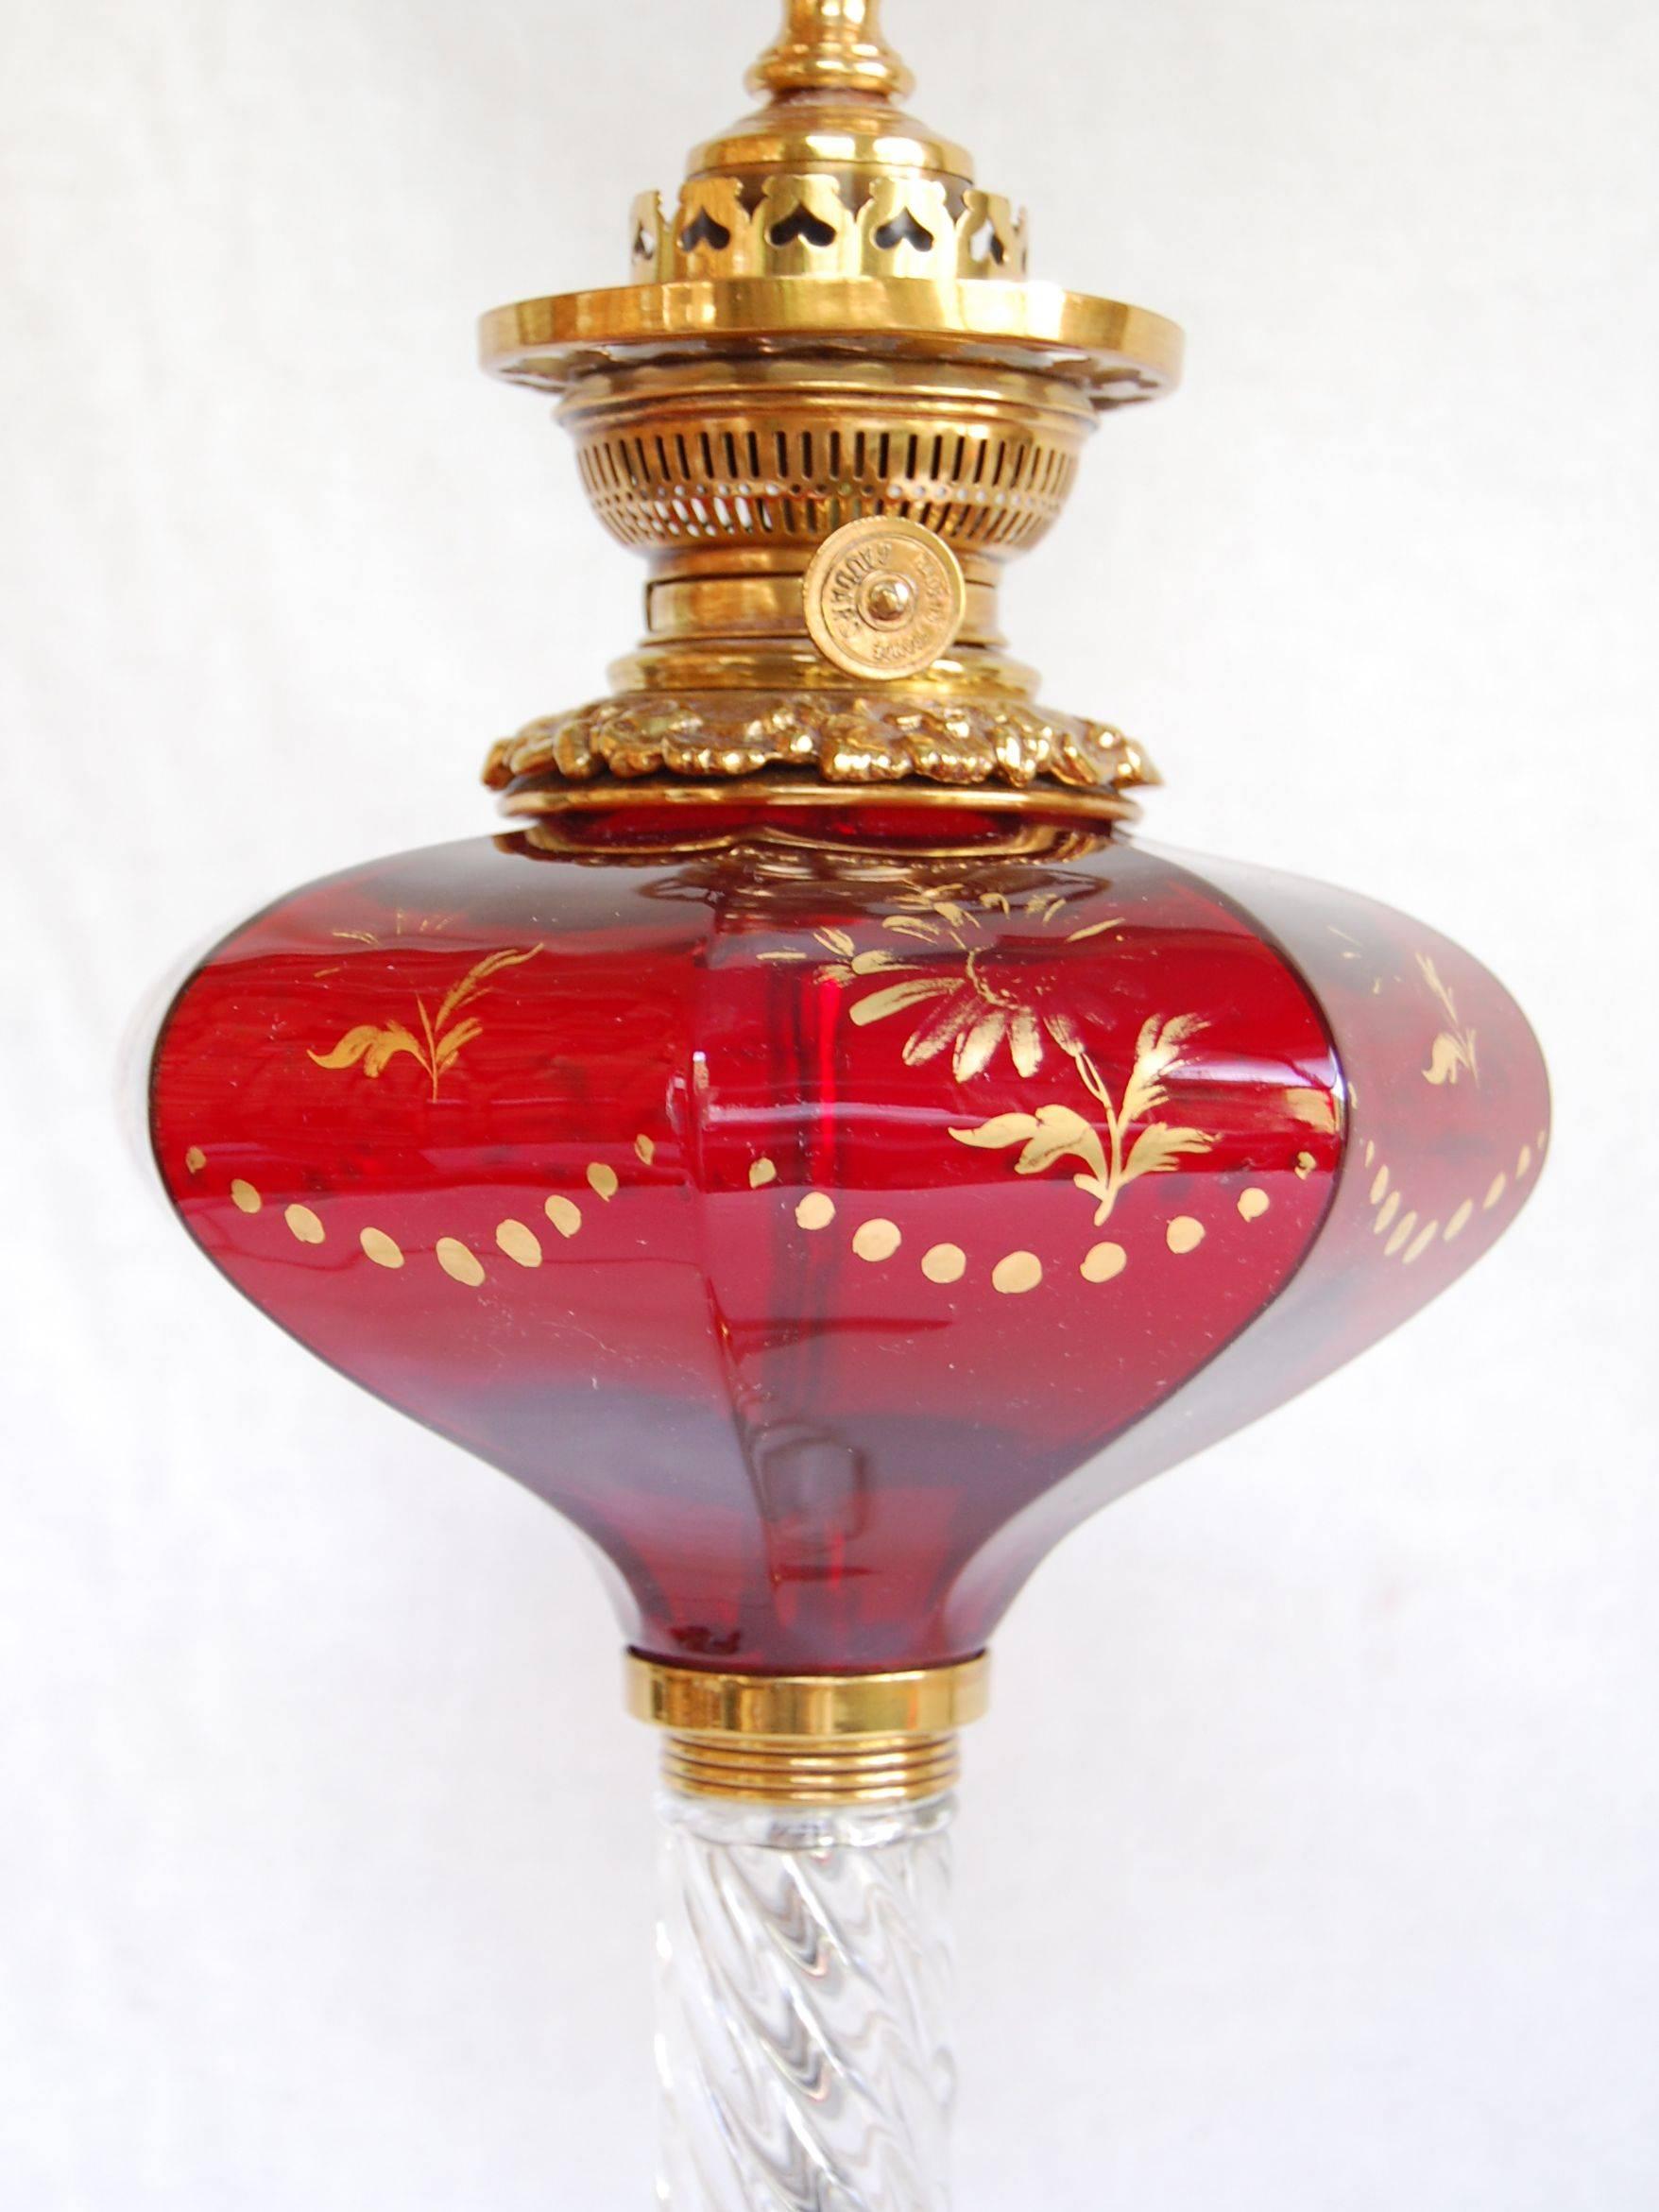 Mid-19th century ruby glass font oil lamp with gold floral decorations and a clear, twisted glass column and base. Cleaned and rewired with a three-way socket. 20 inches to the top of lamp, 30 inches to the shade rest. American or English, possibly